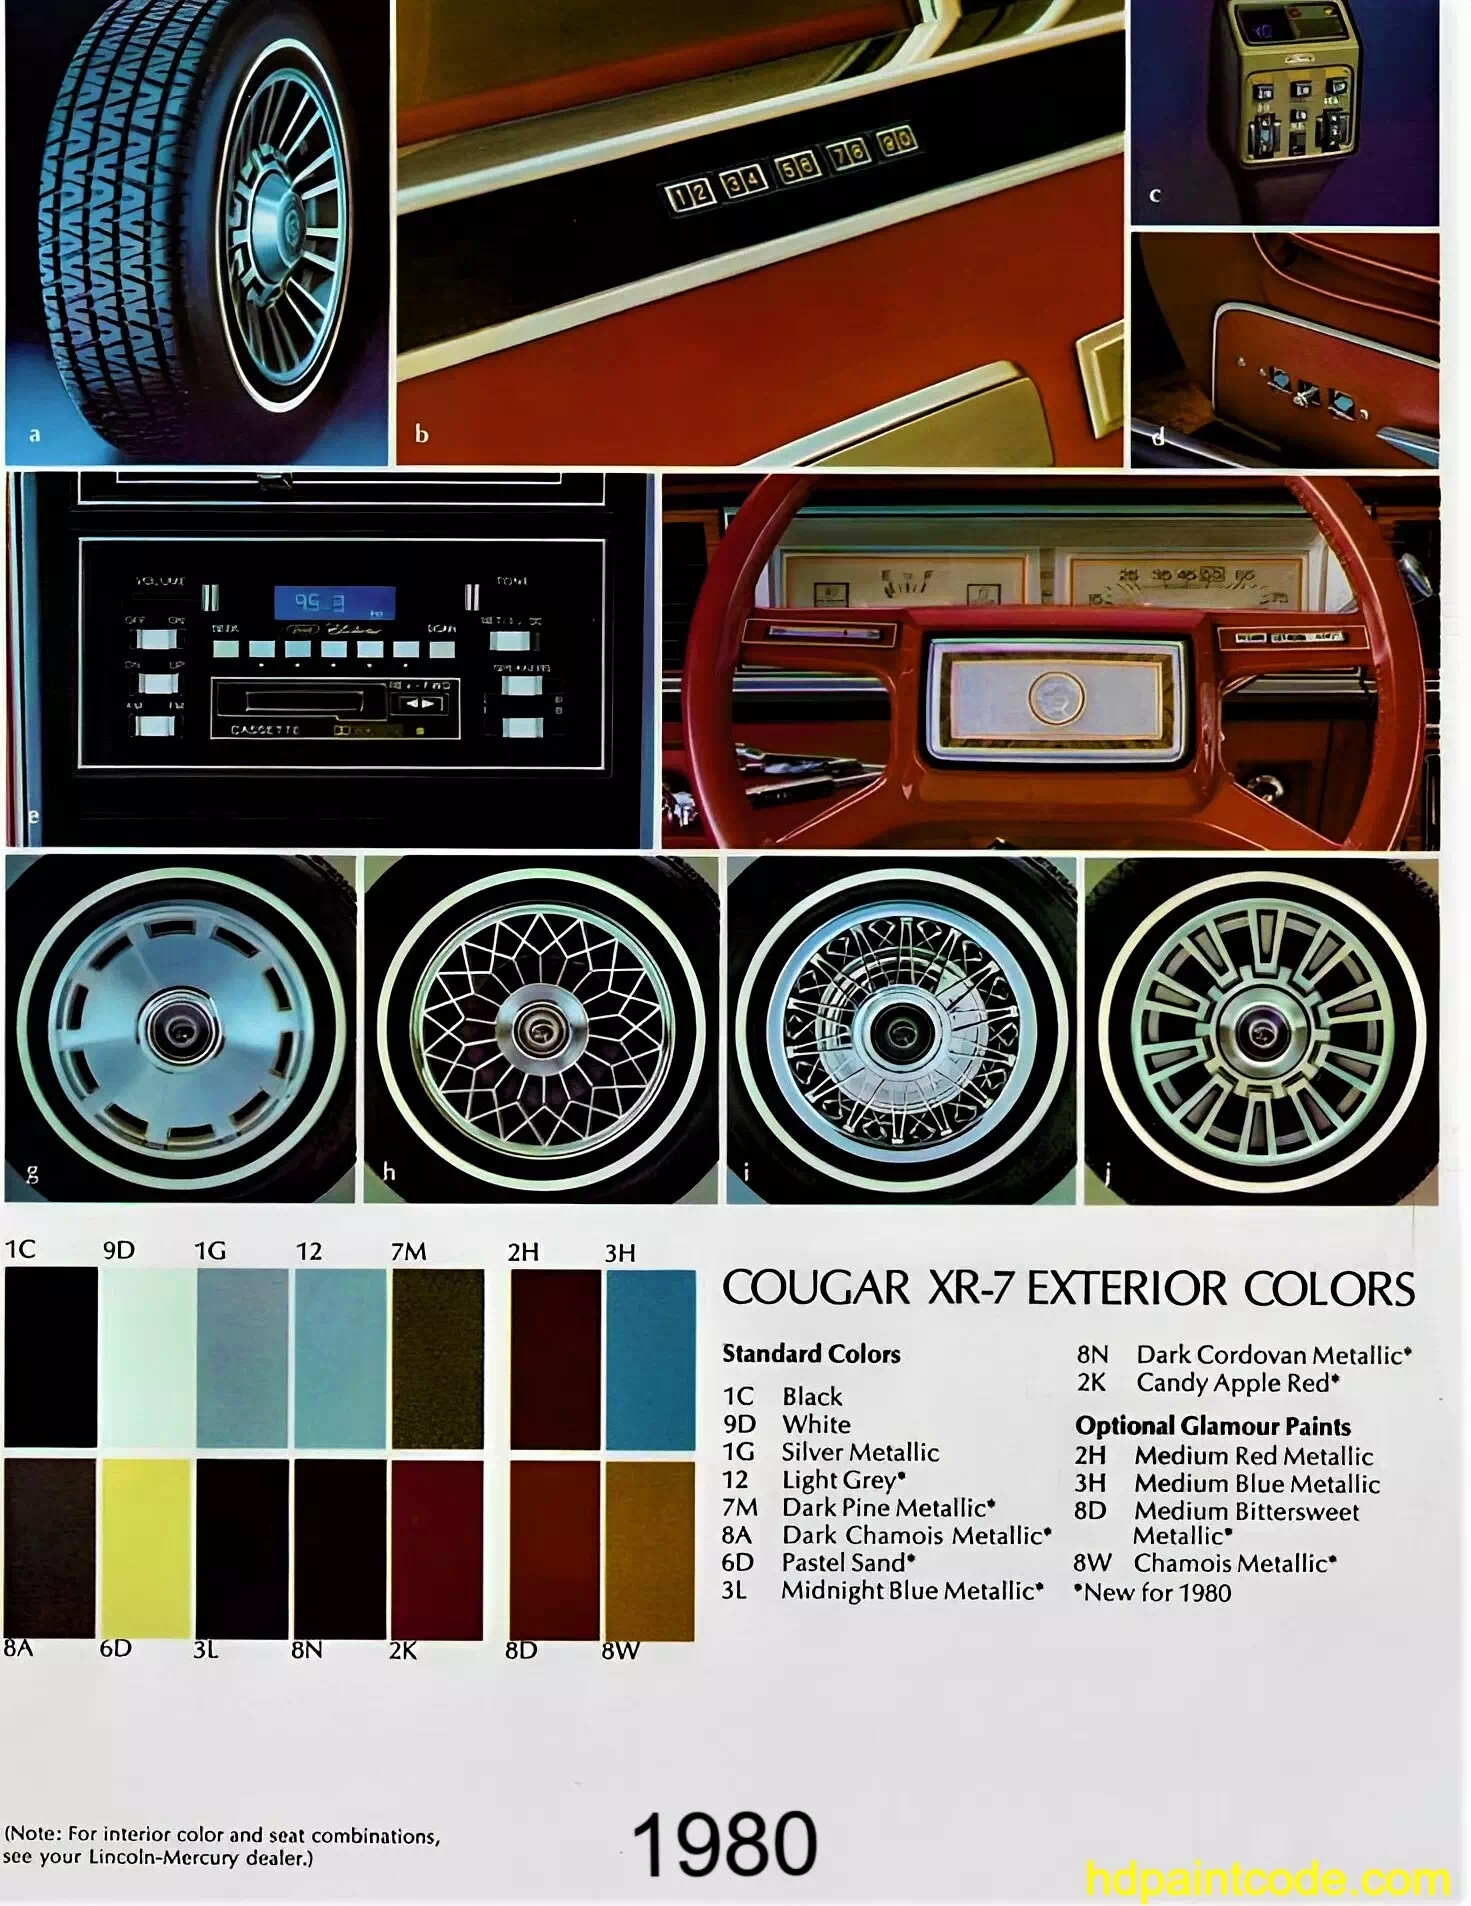 Paint codes, Exterior Colors, and Vehicle Rims used on the 1980 Mercury Cougar XR7 automobiles